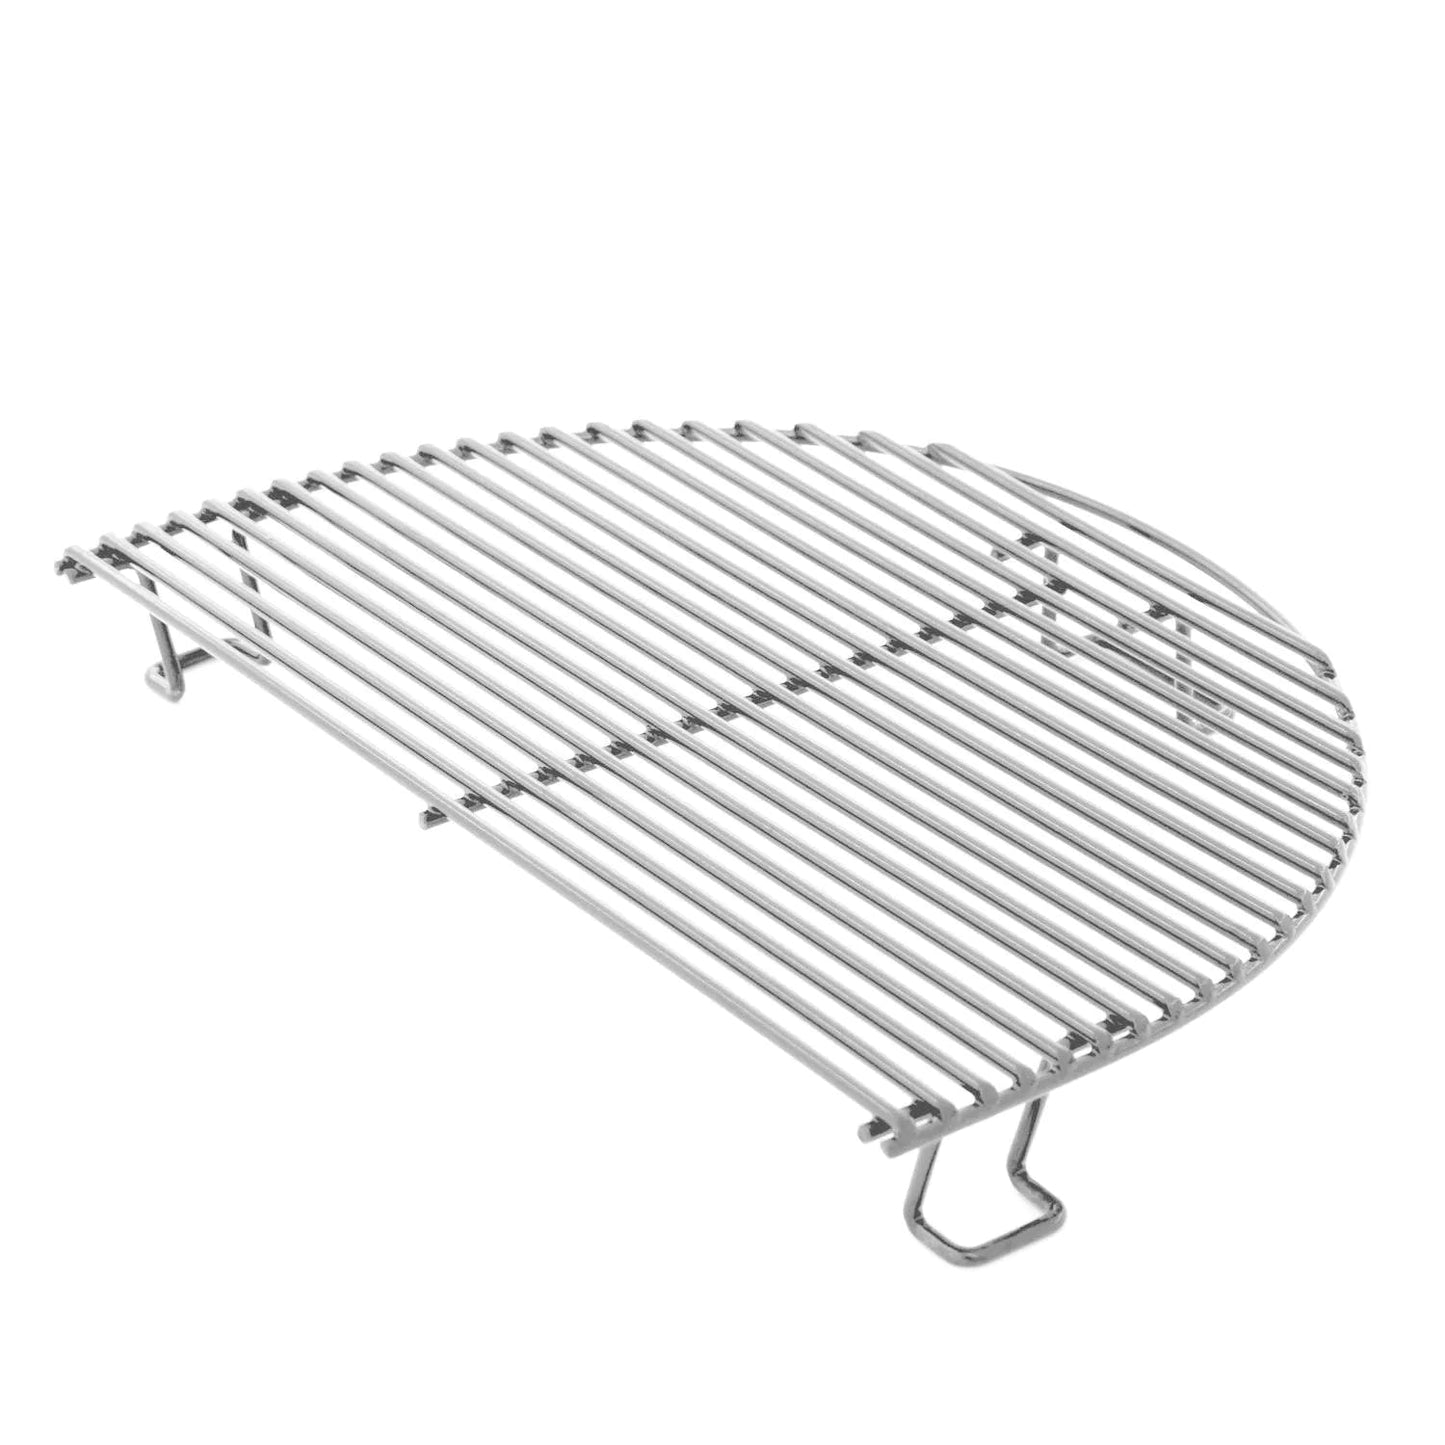 Oval Junior Charcoal Grill